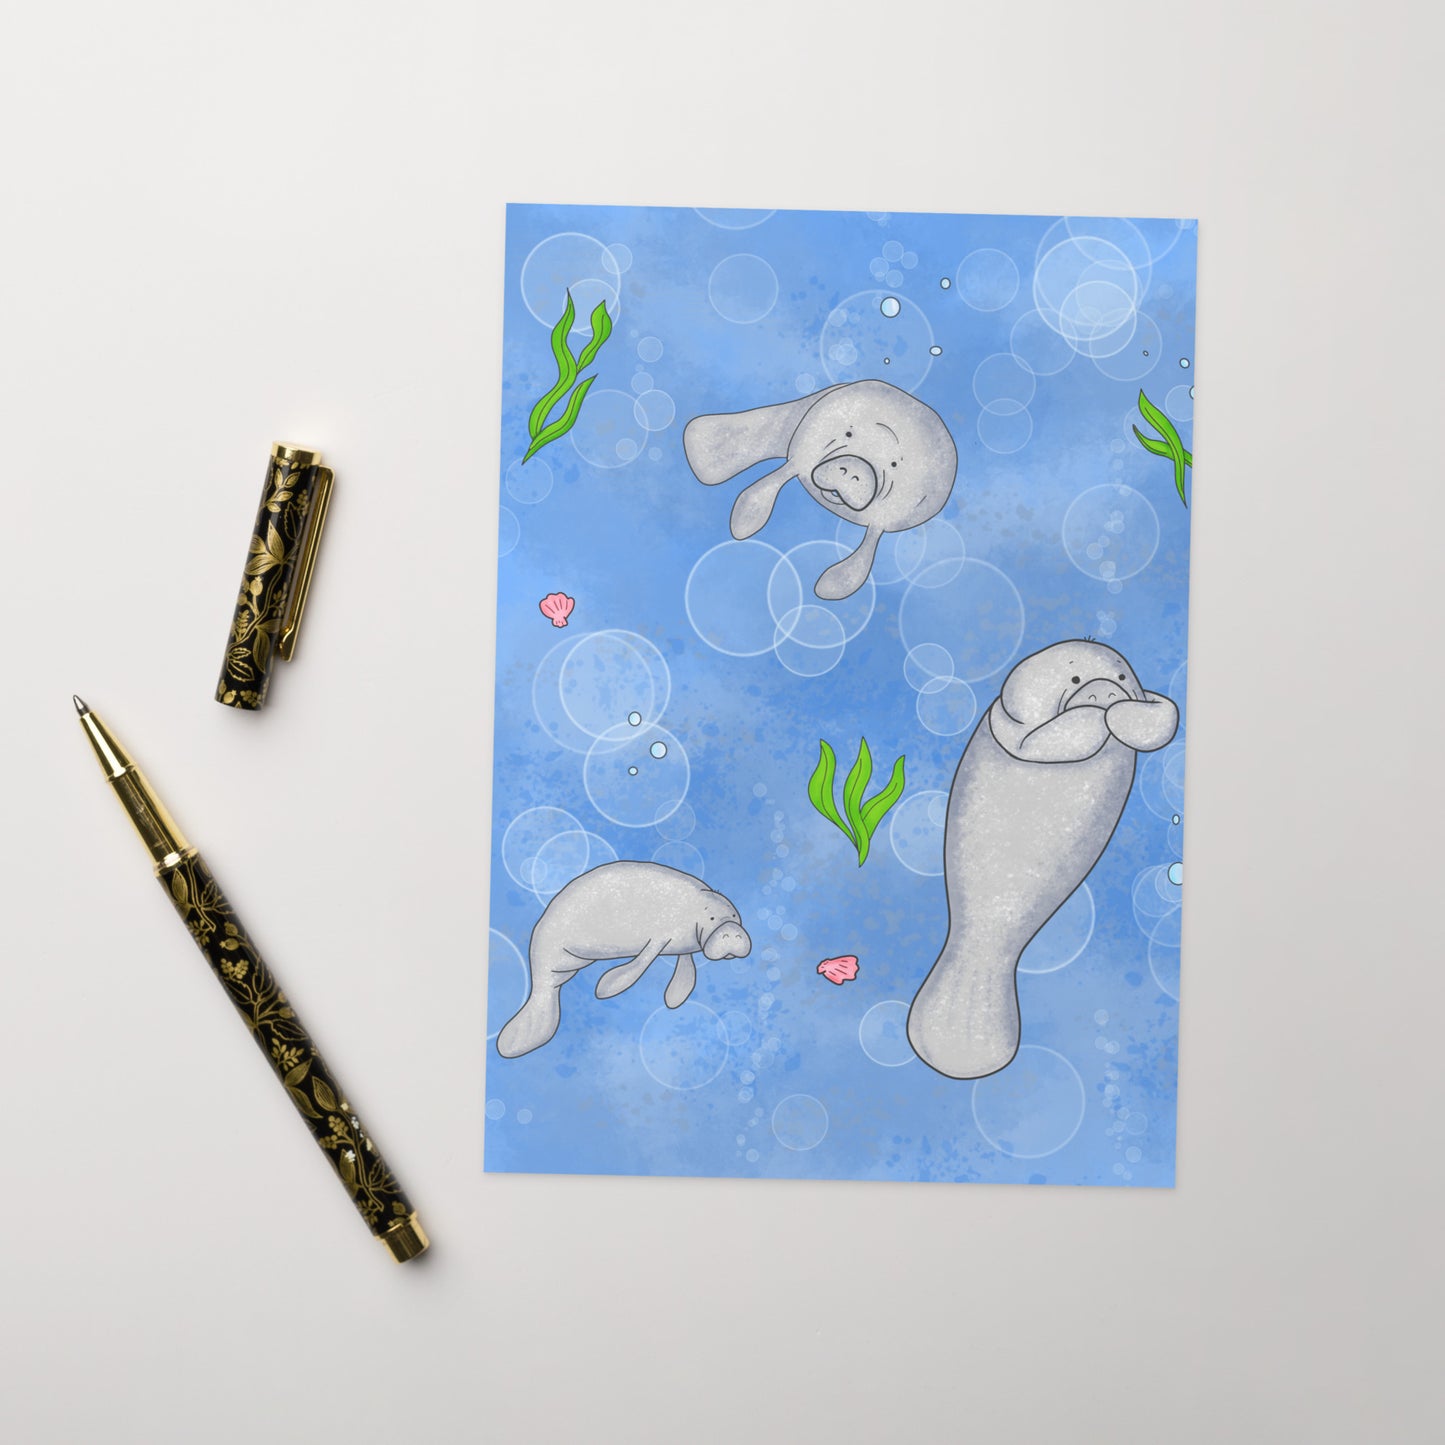 Pack of ten 5 x 7 inch greeting cards. Features illustrated roly-poly manatees on the front. Inside is blank. Made of coated paperboard. Comes with ten envelopes. Shown on tabletop by ballpoint pen.